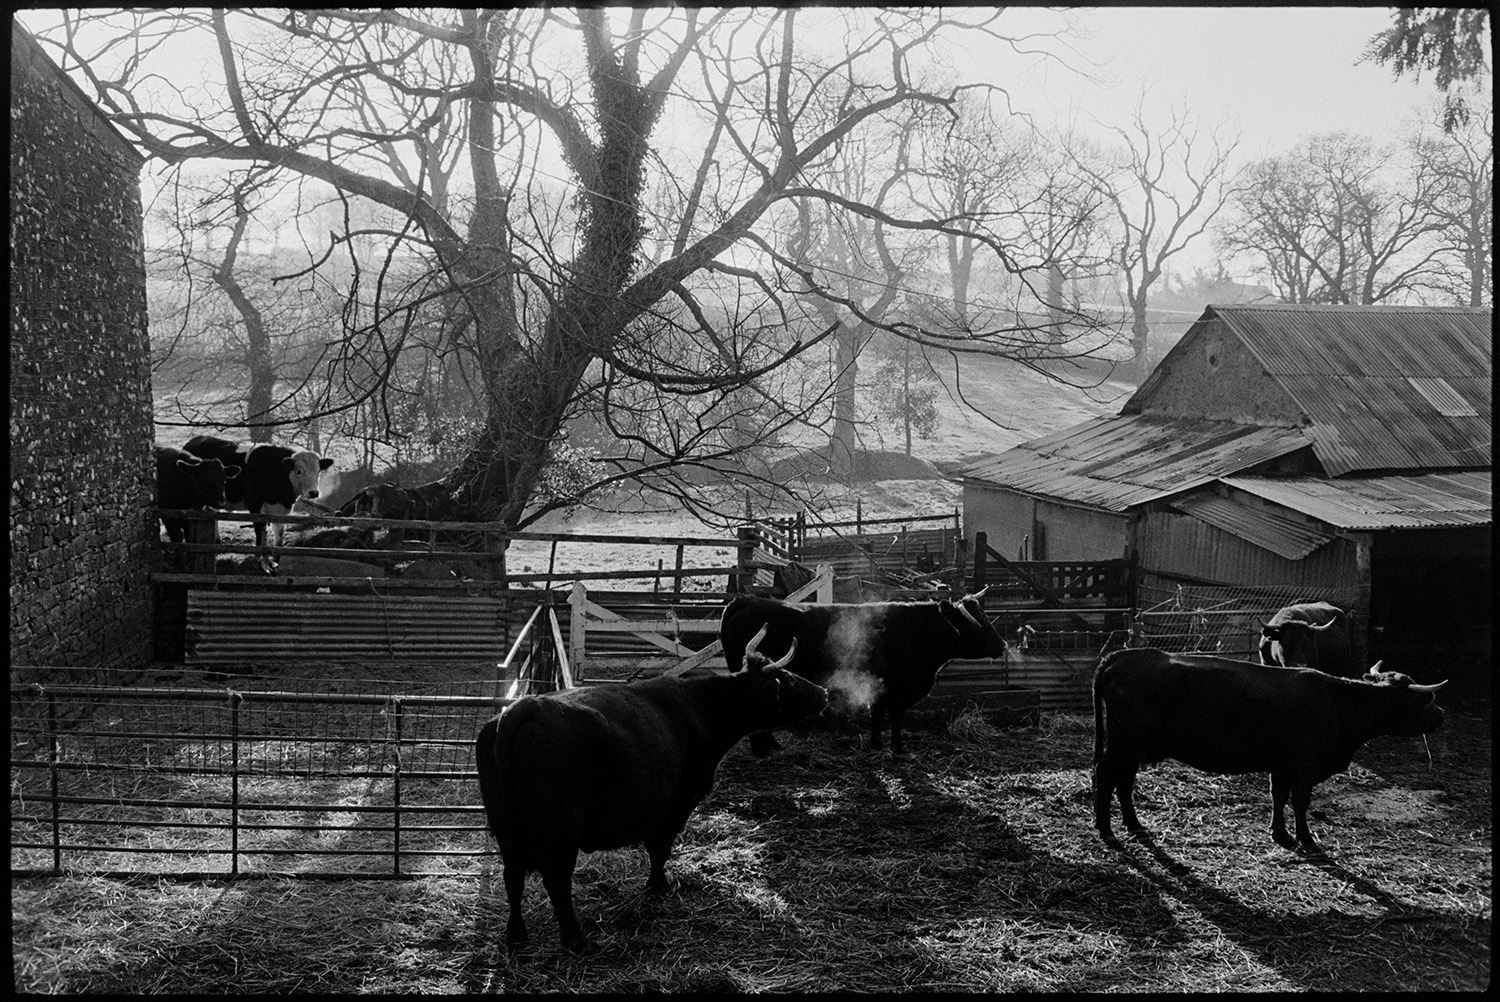 Cattle in frosty field and yard. Devon Reds with horns.
[Horned Red Devon cattle standing in the farmyard with light shining though trees at Lower Langham, Dolton on a sunny, frosty morning. Barns with corrugated iron roof scan also be seen in the farmyard.]